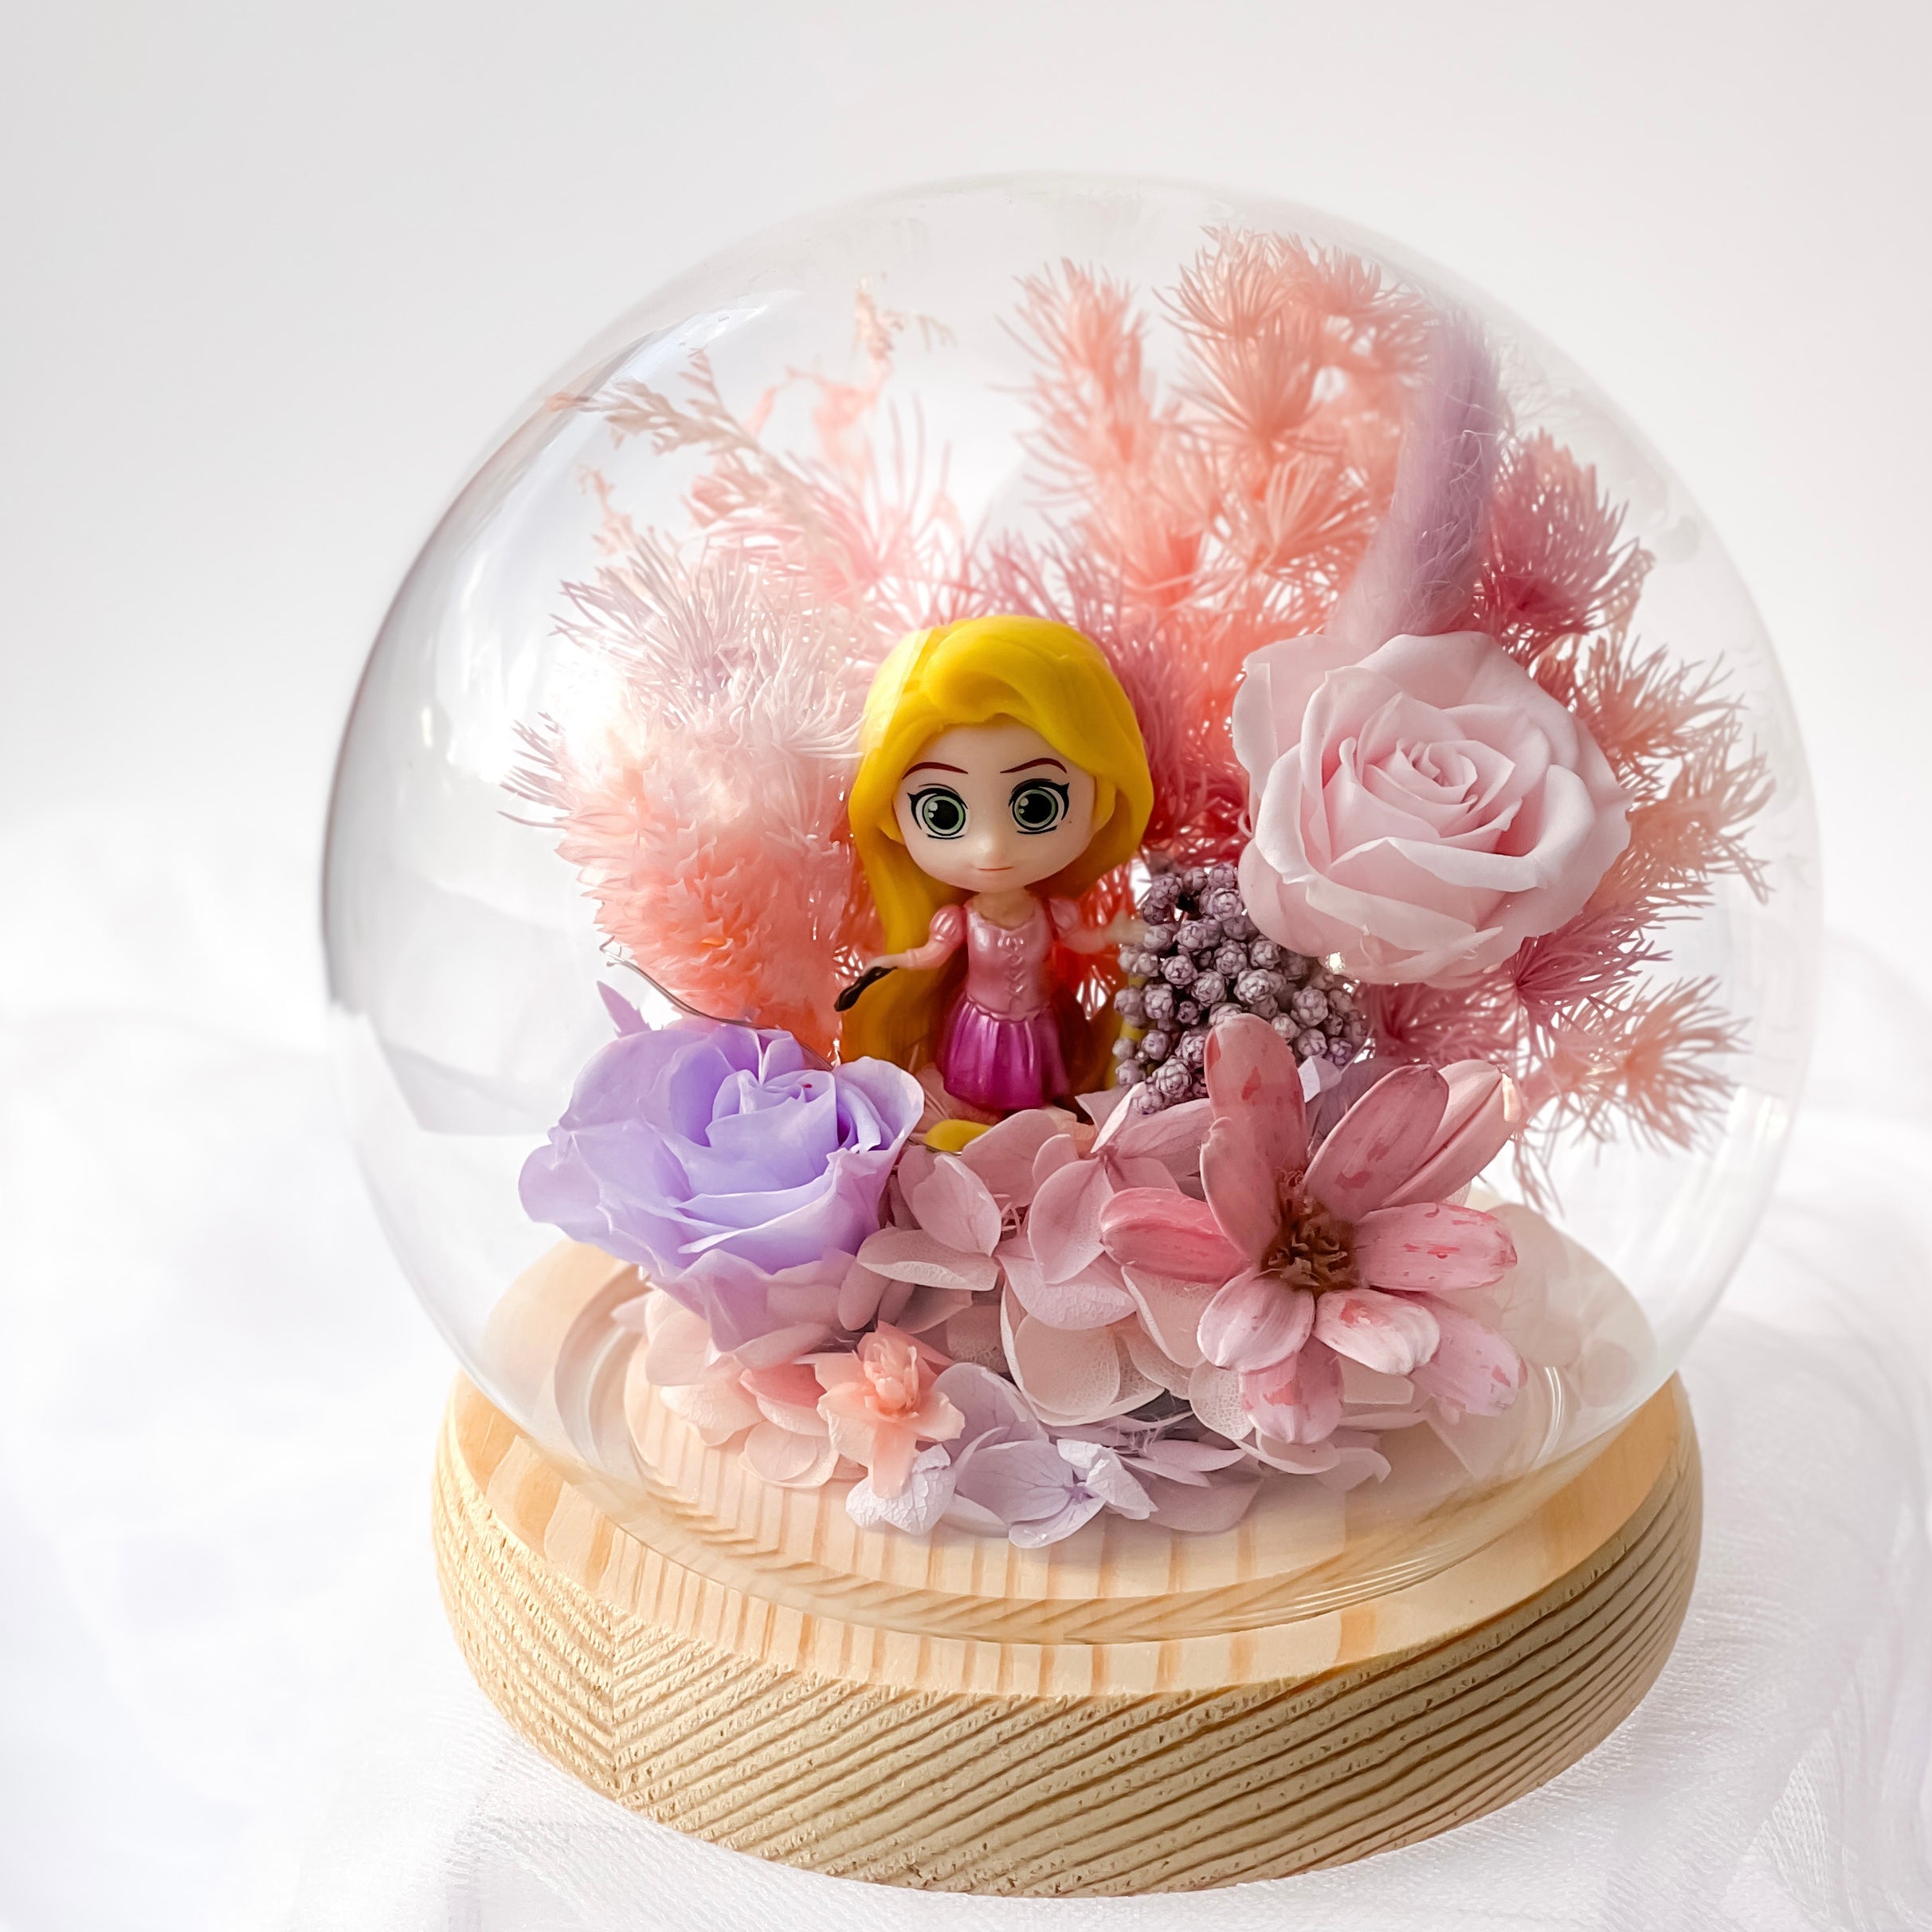 Glass Dome with Preserved Flower and Disney Princess - Rapunzel Figurine